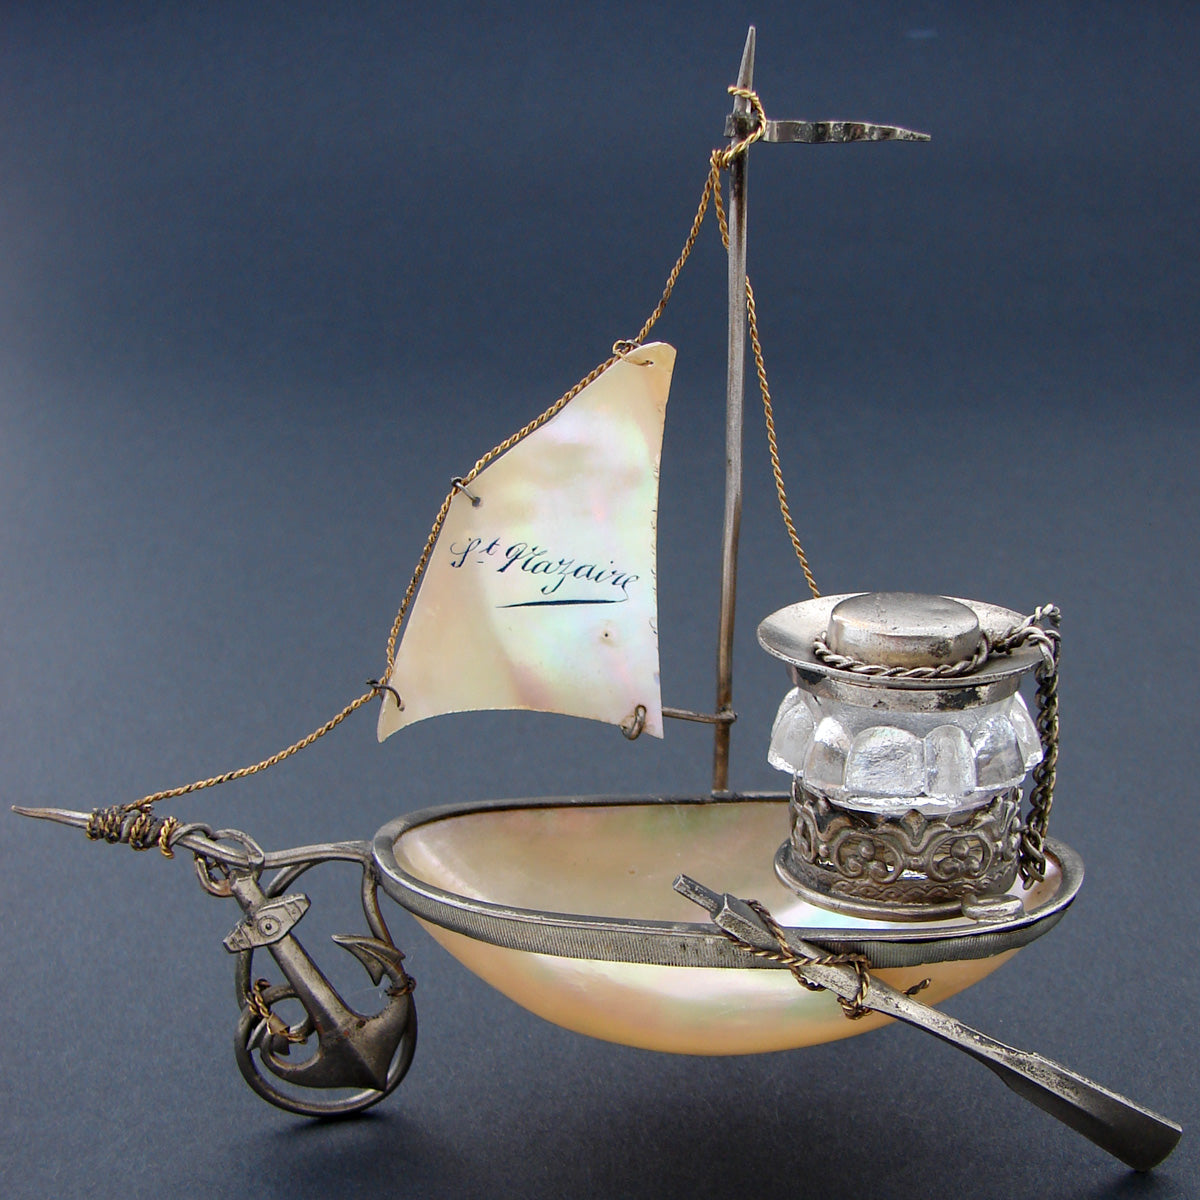 Antique French Grand Tour Style Souvenir Mother of Pearl Sailboat, Inkwell with Sailor's Hat Cap